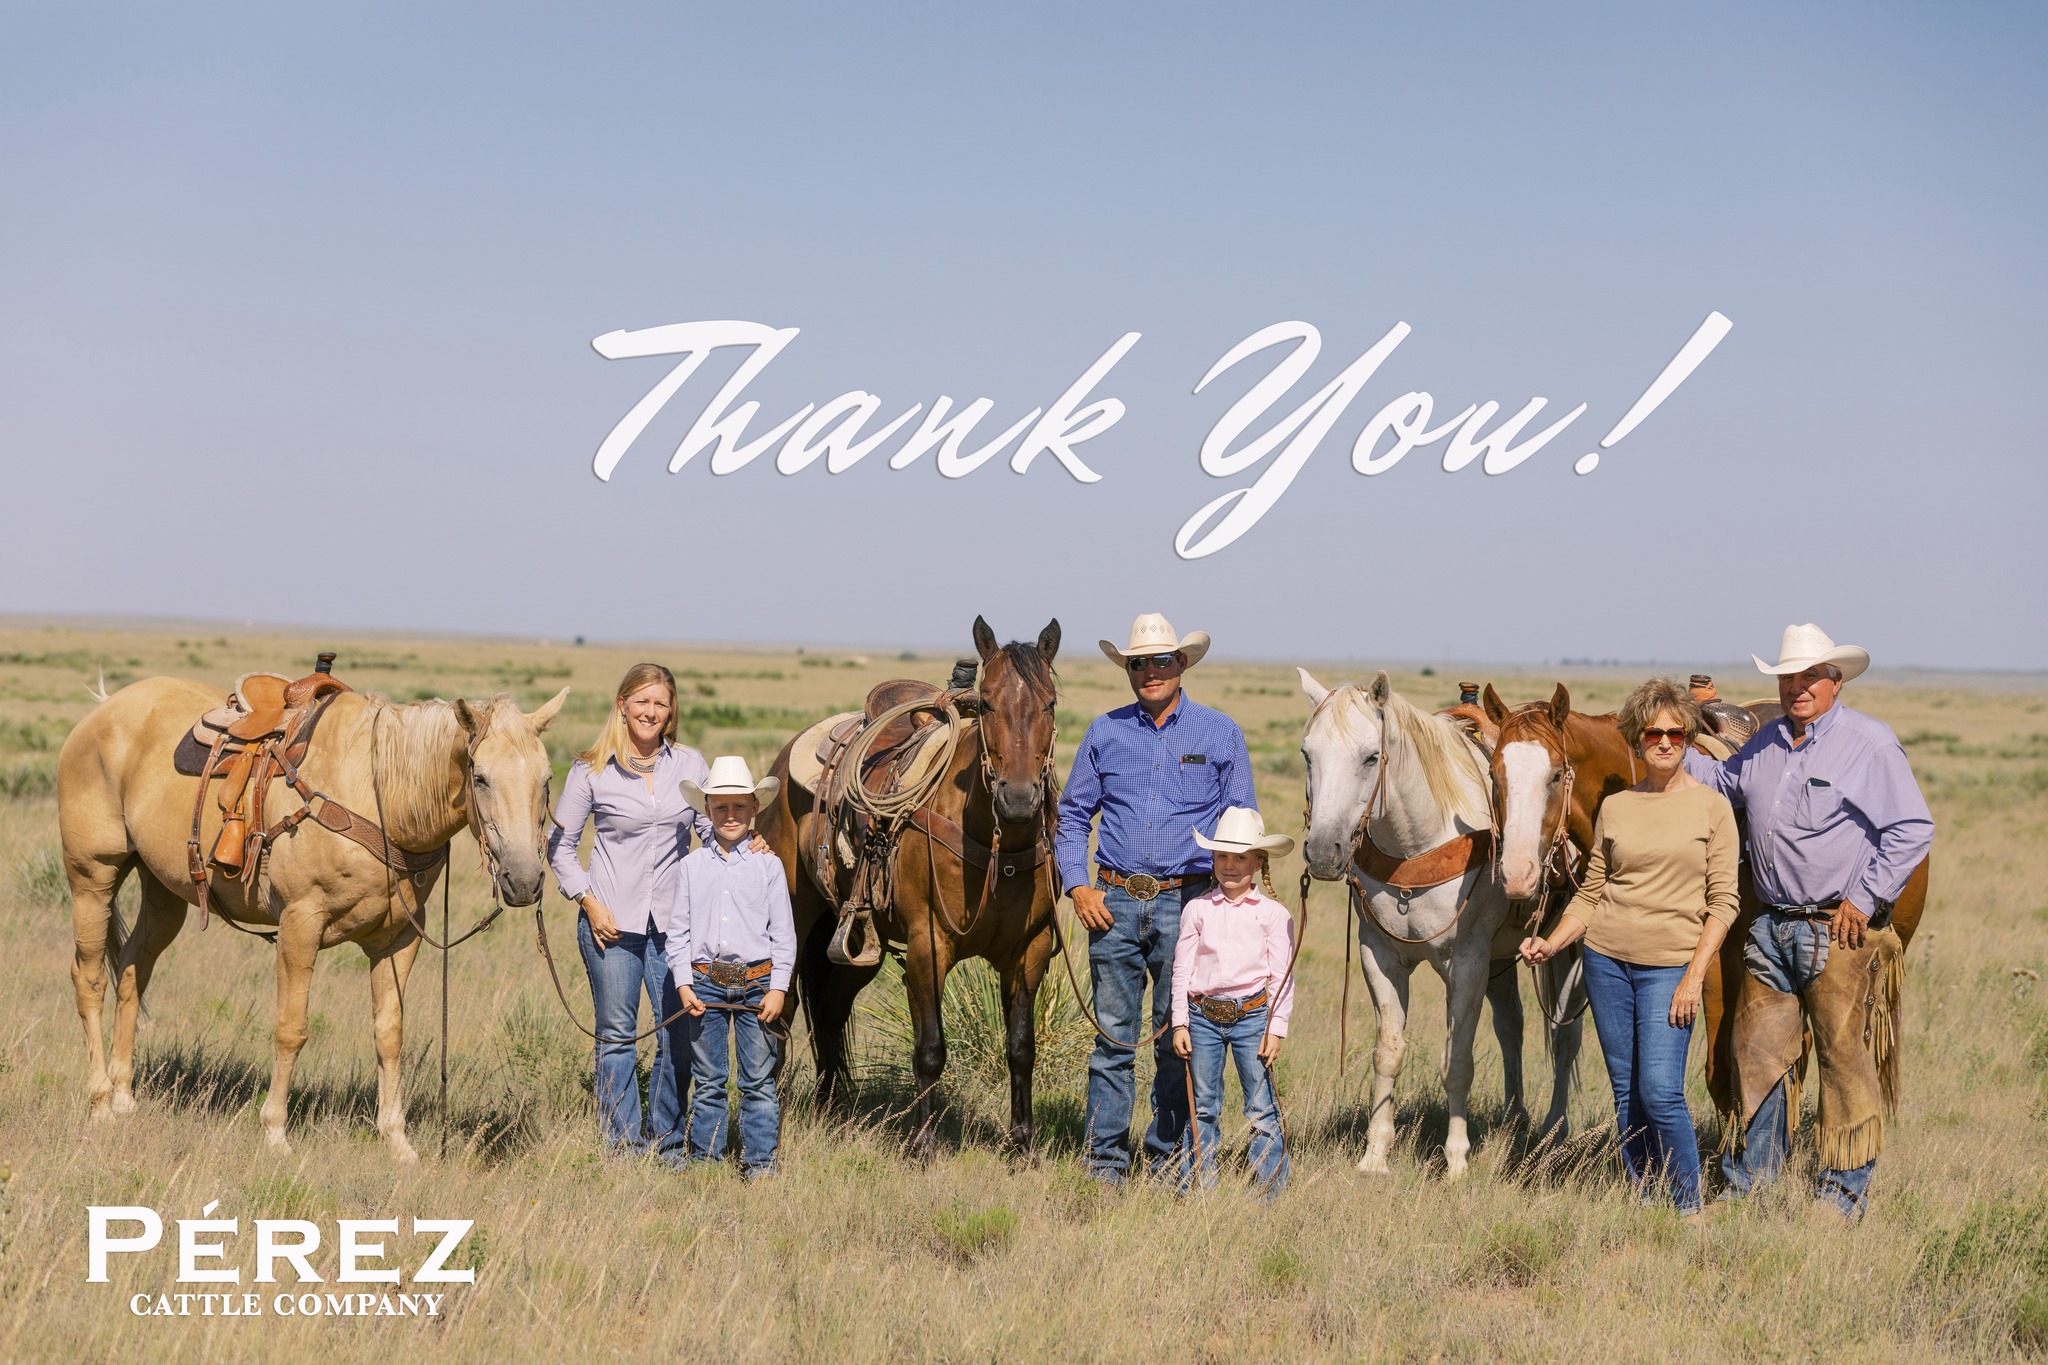 A "thank you" card with a family posing with horses in a field.